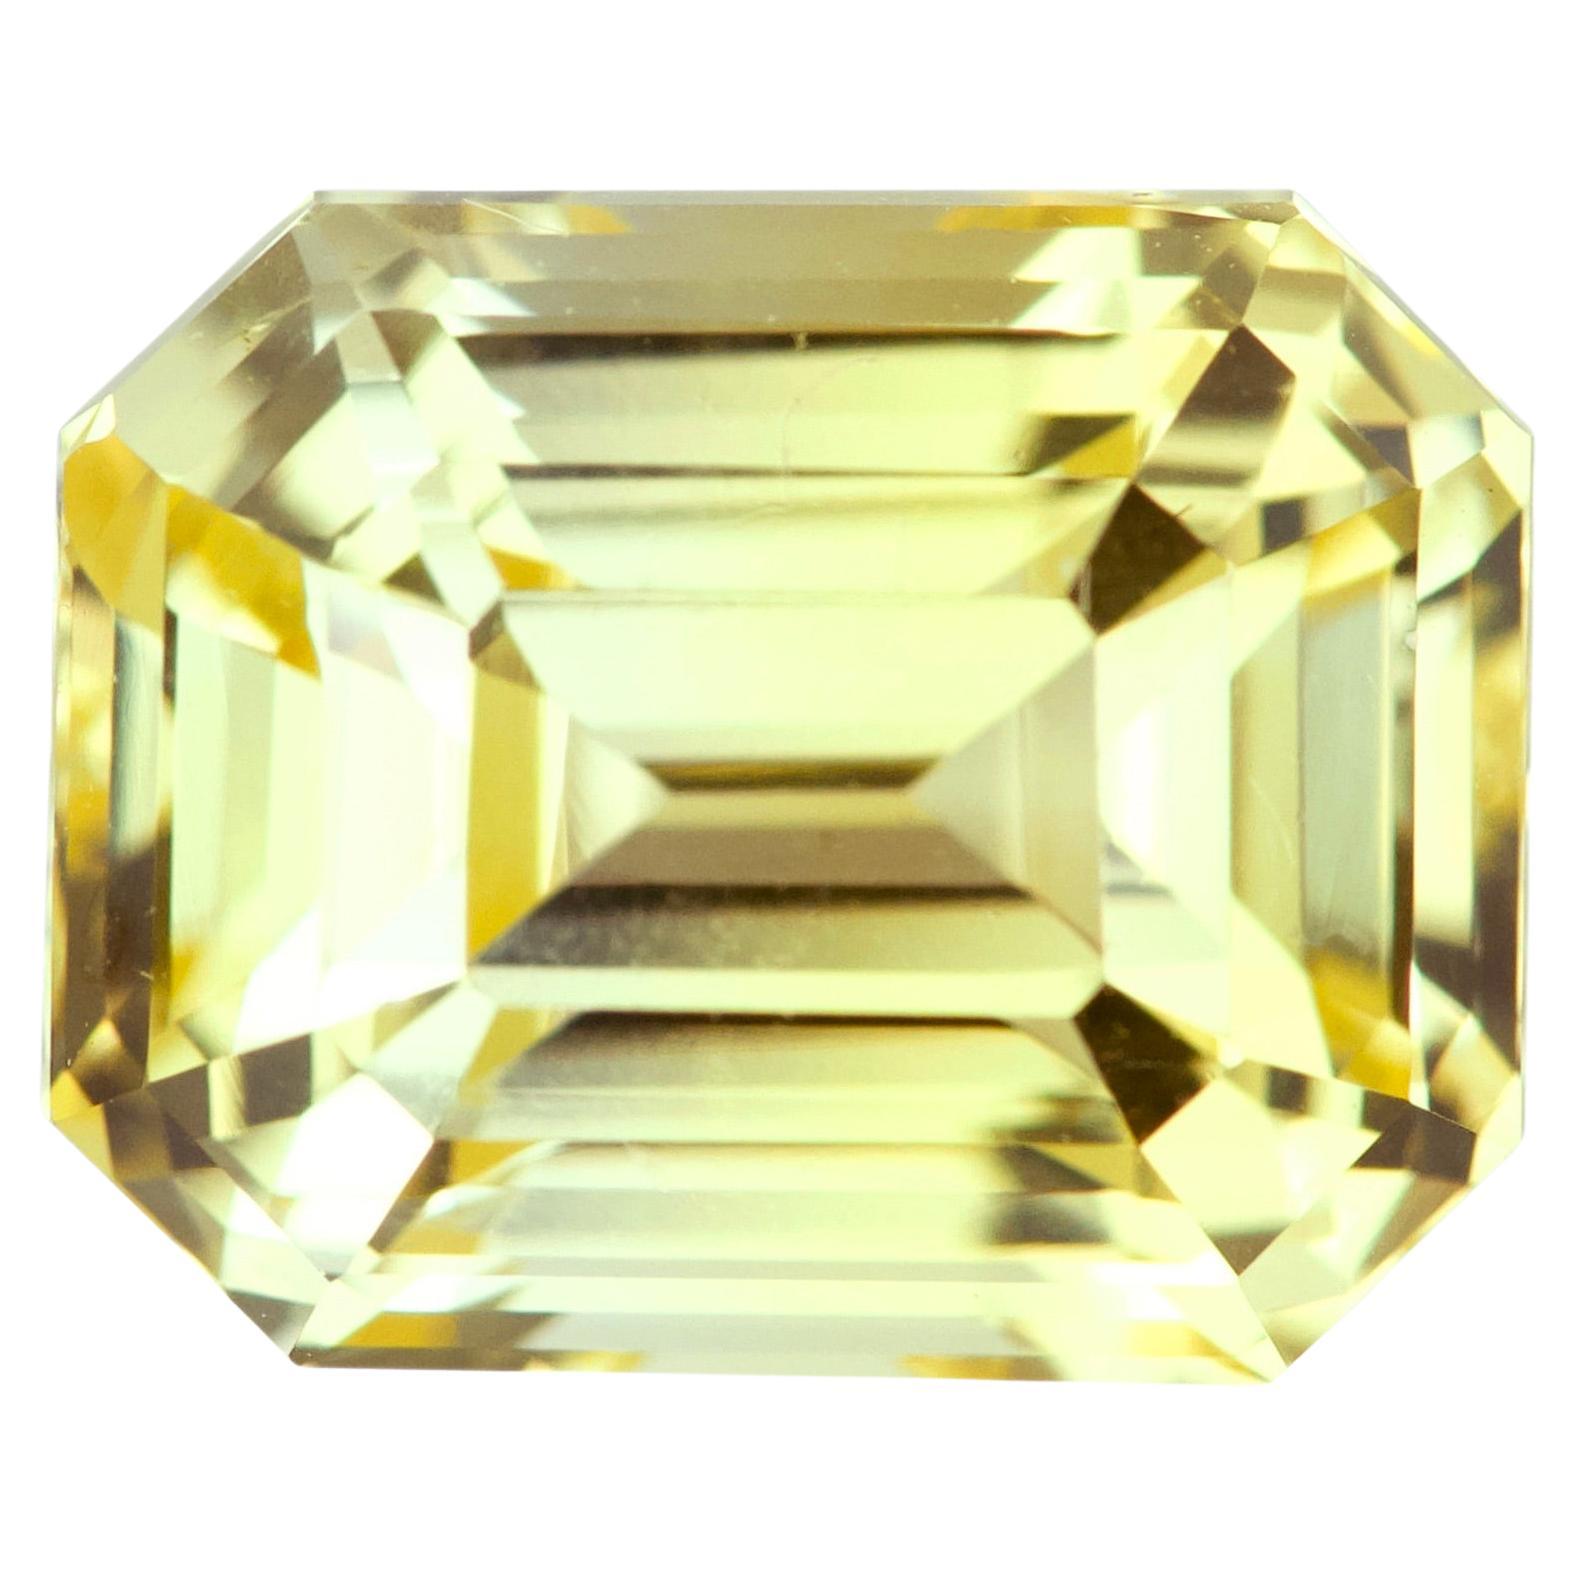 Vivid Yellow 5.09ct Sapphire Emerald Cut Natural Unheated, Loose Gemstone For Sale